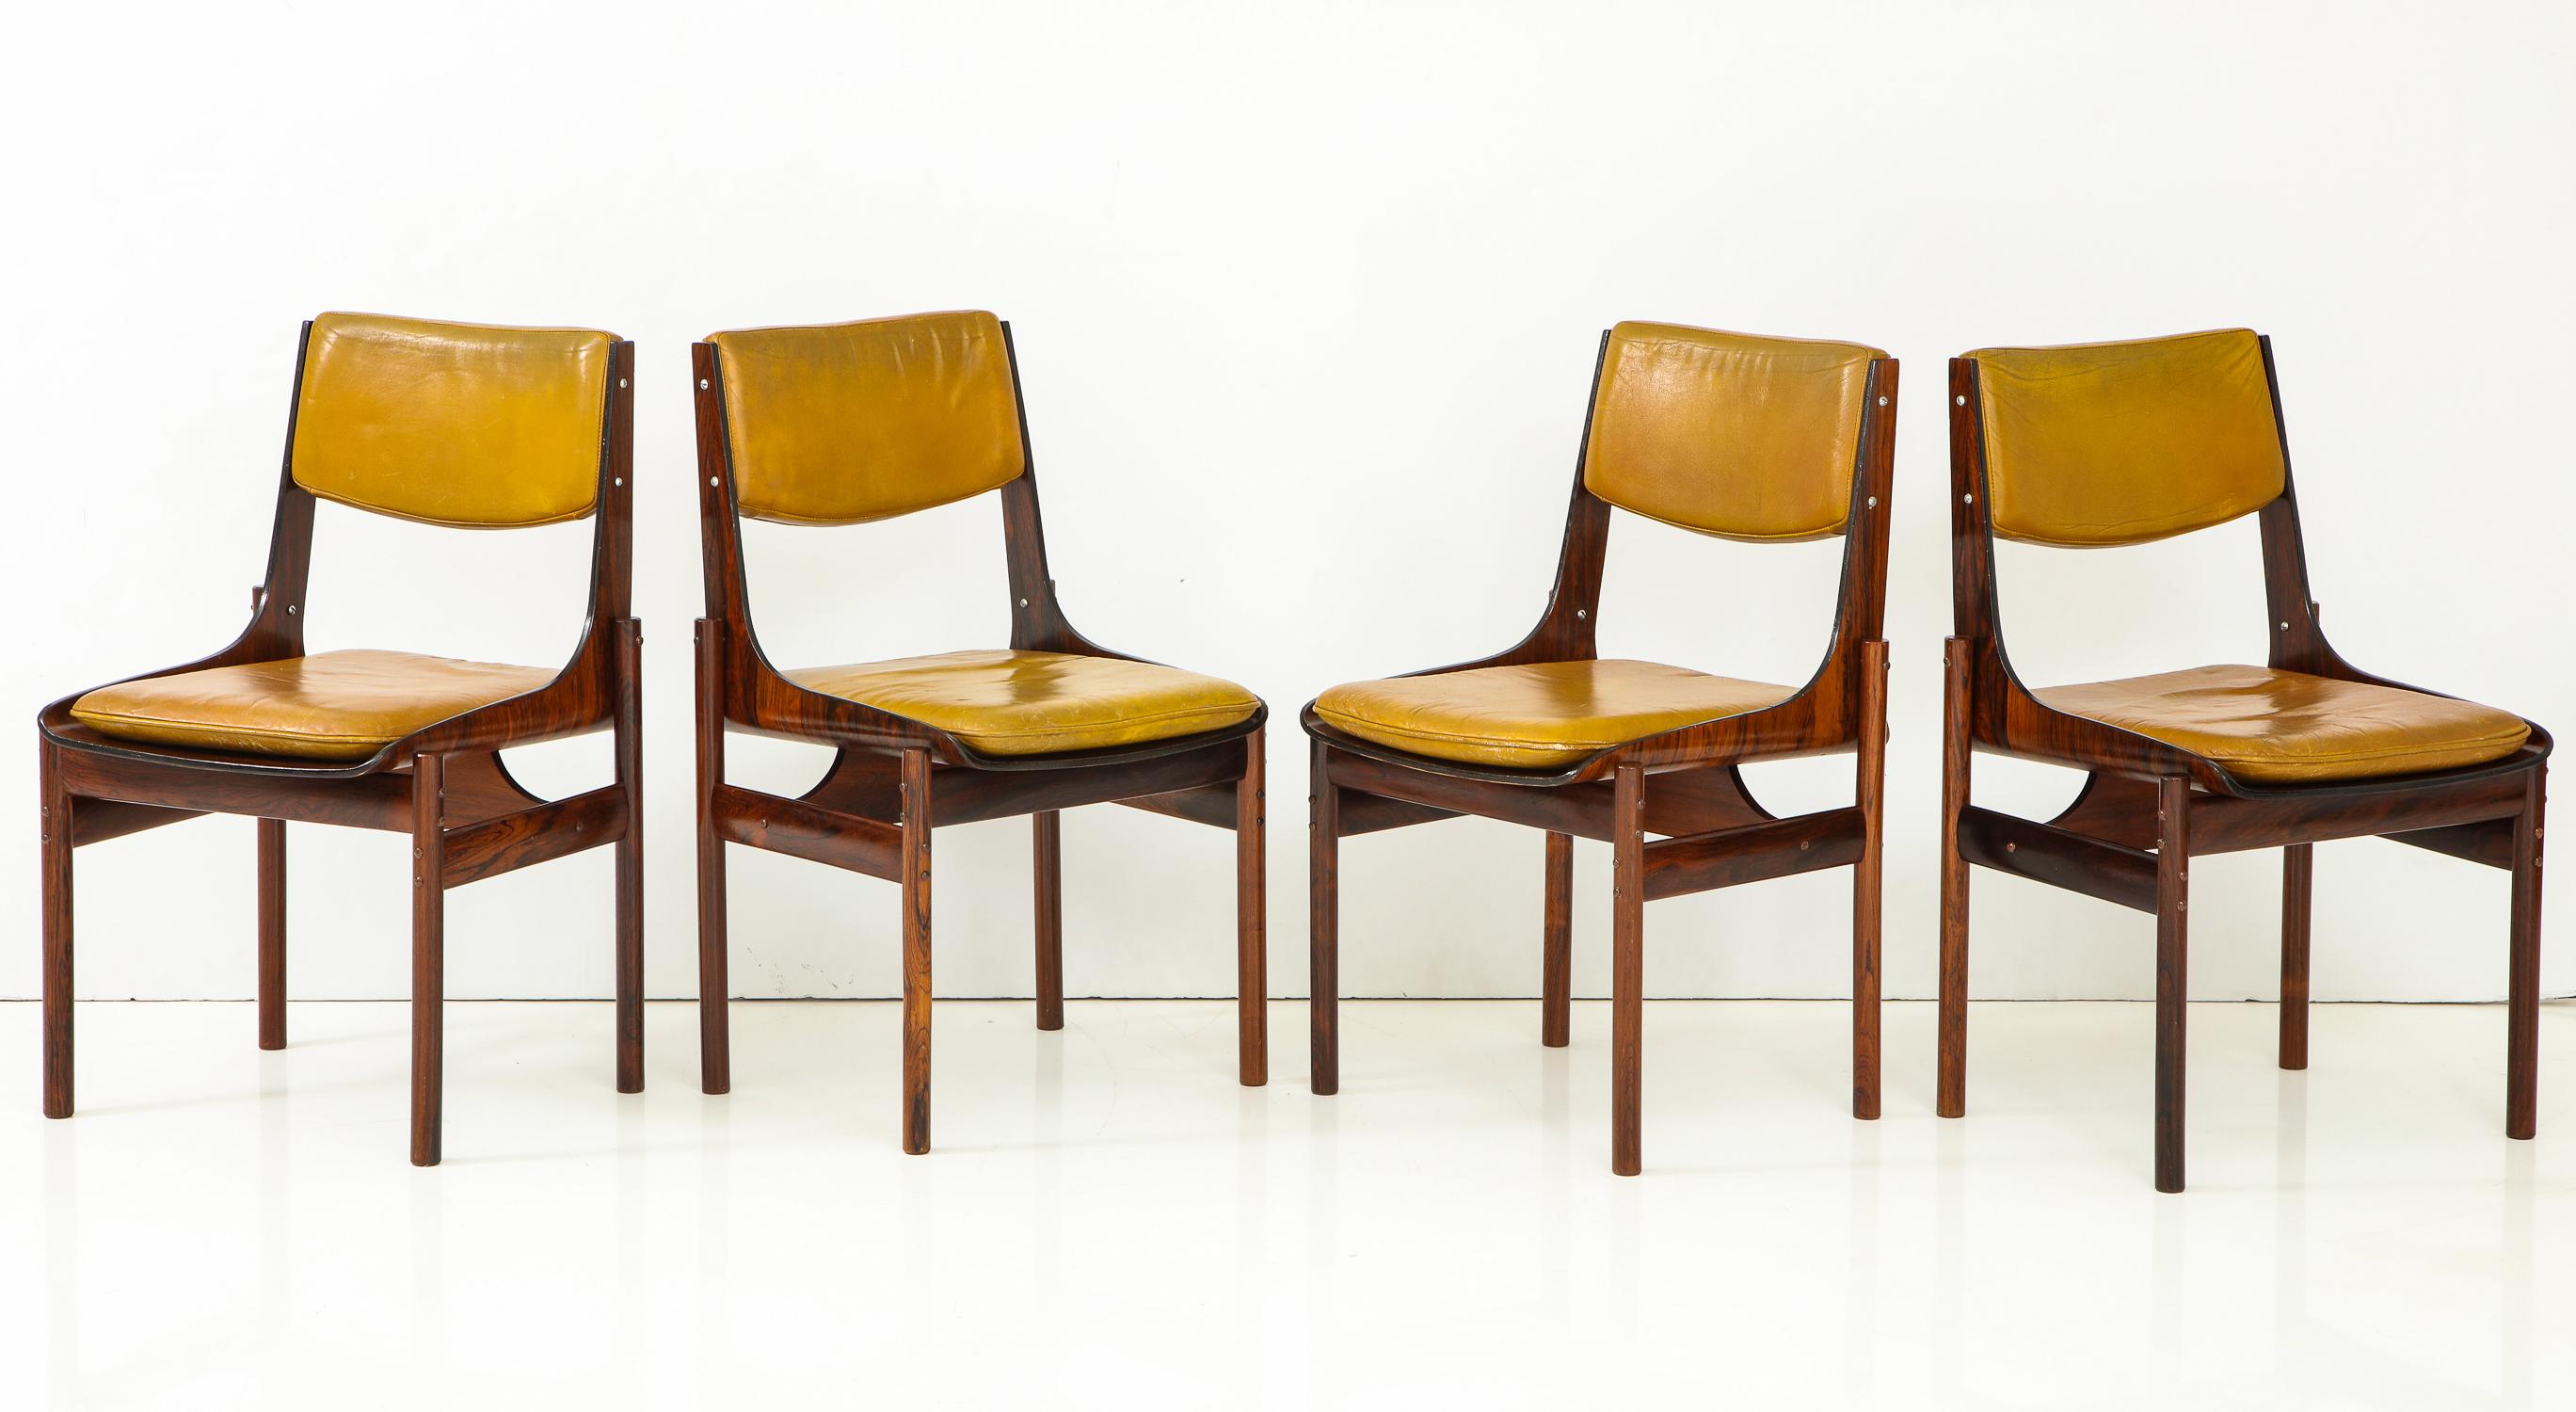 Set of four dining chairs in Jacaranda and Jacaranda plywood with original yellow ochre leather back cushions and loose seat cushions. Made in Sao Paulo, Brazil, circa 1965 by J.D. Moveis e Decoracoes in a style inspired by Jorge Zalszupin. With one